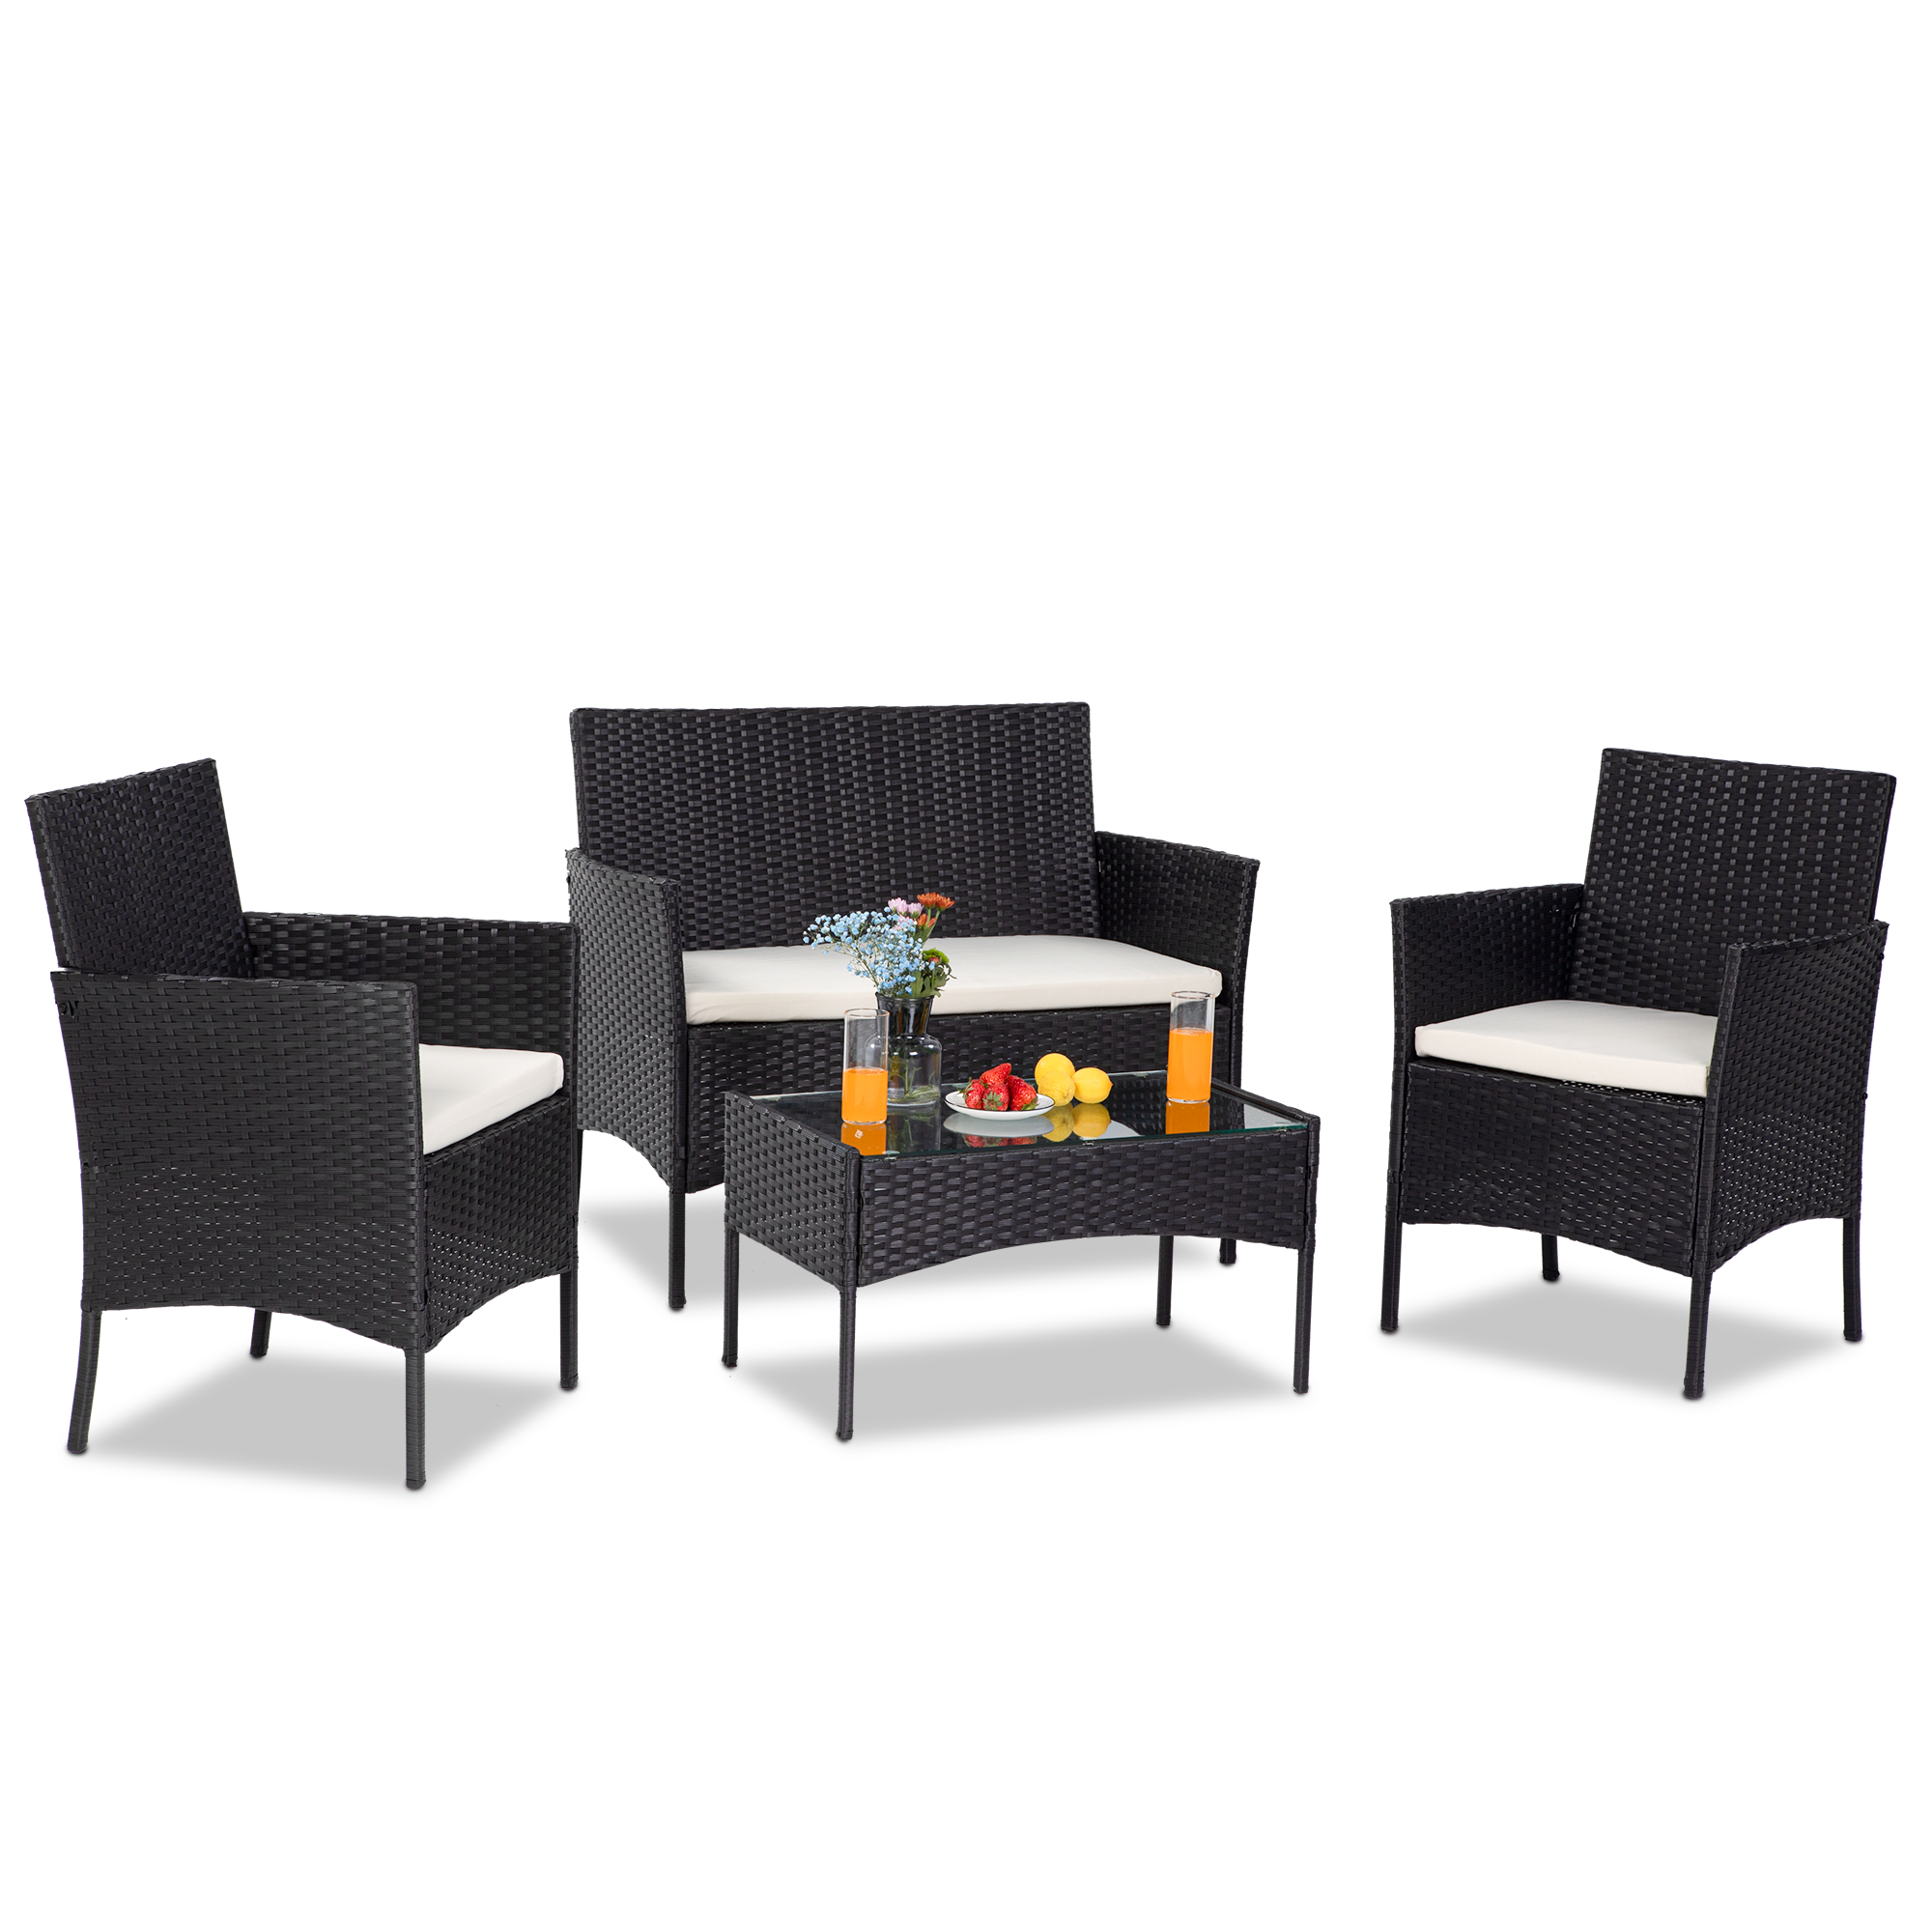 uhomepro 8-Piece Patio Bistro Set, Outdoor Furniture PE Rattan Wicker Patio Set, Porch Conversation Sets with Glass Coffee Table, Wicker Chair Set for Backyard Garden Lawn Poolside, Black - image 4 of 12